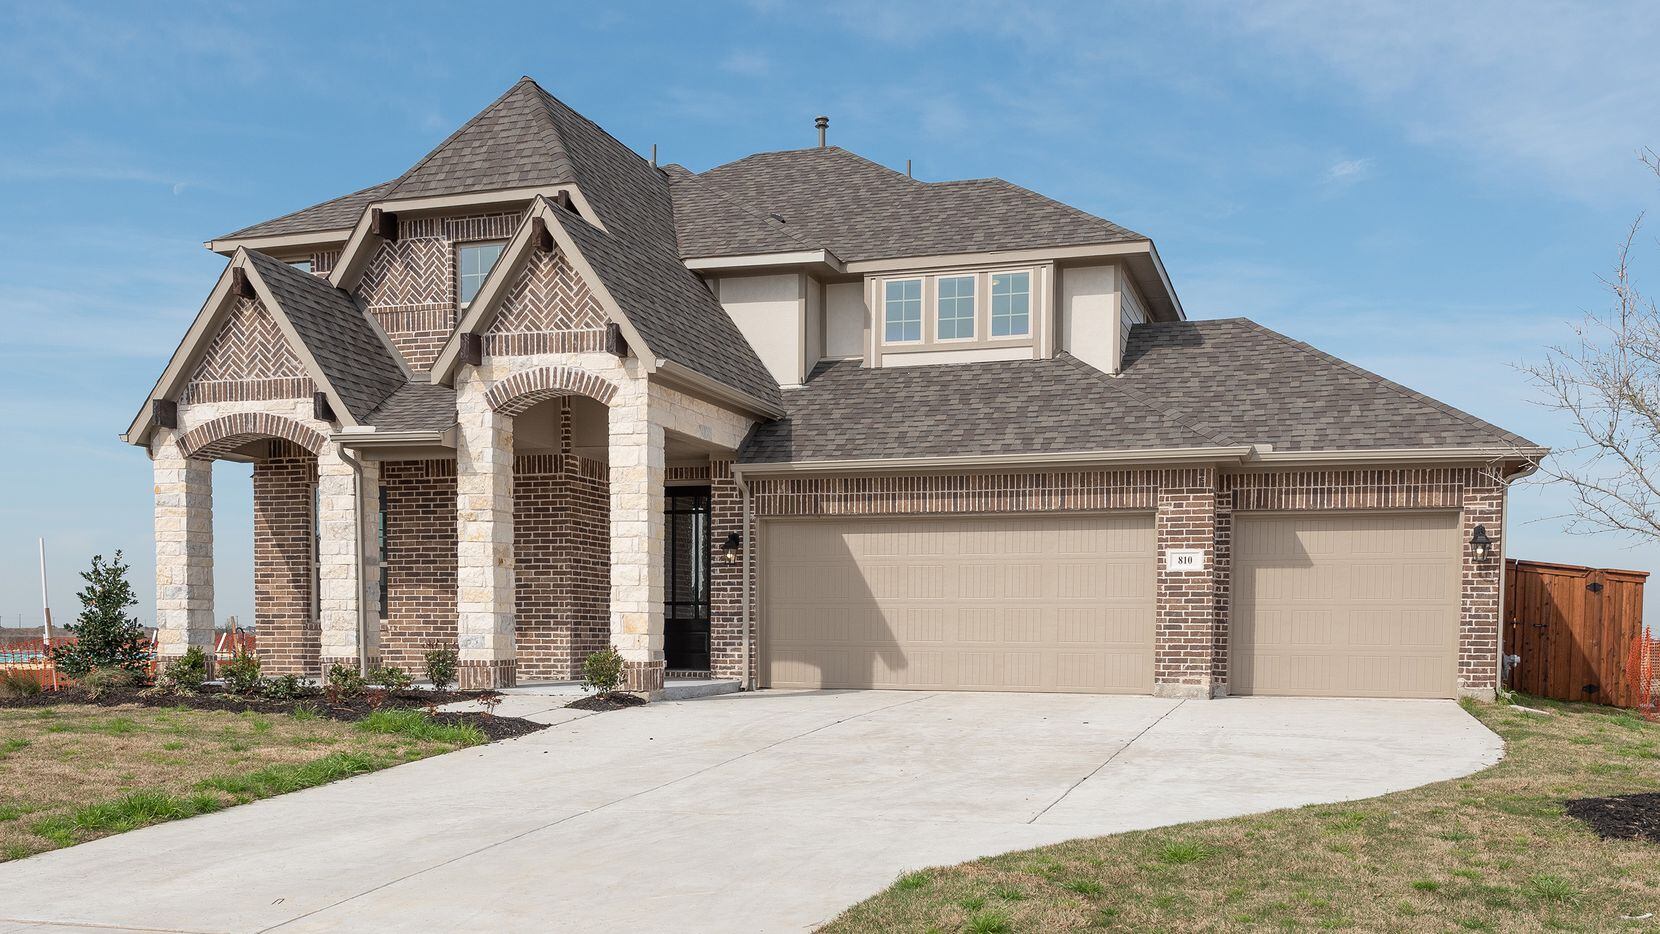 The Duchman design from Pacesetter Homes is located at 810 Grove Vale Drive in Prosper’s...